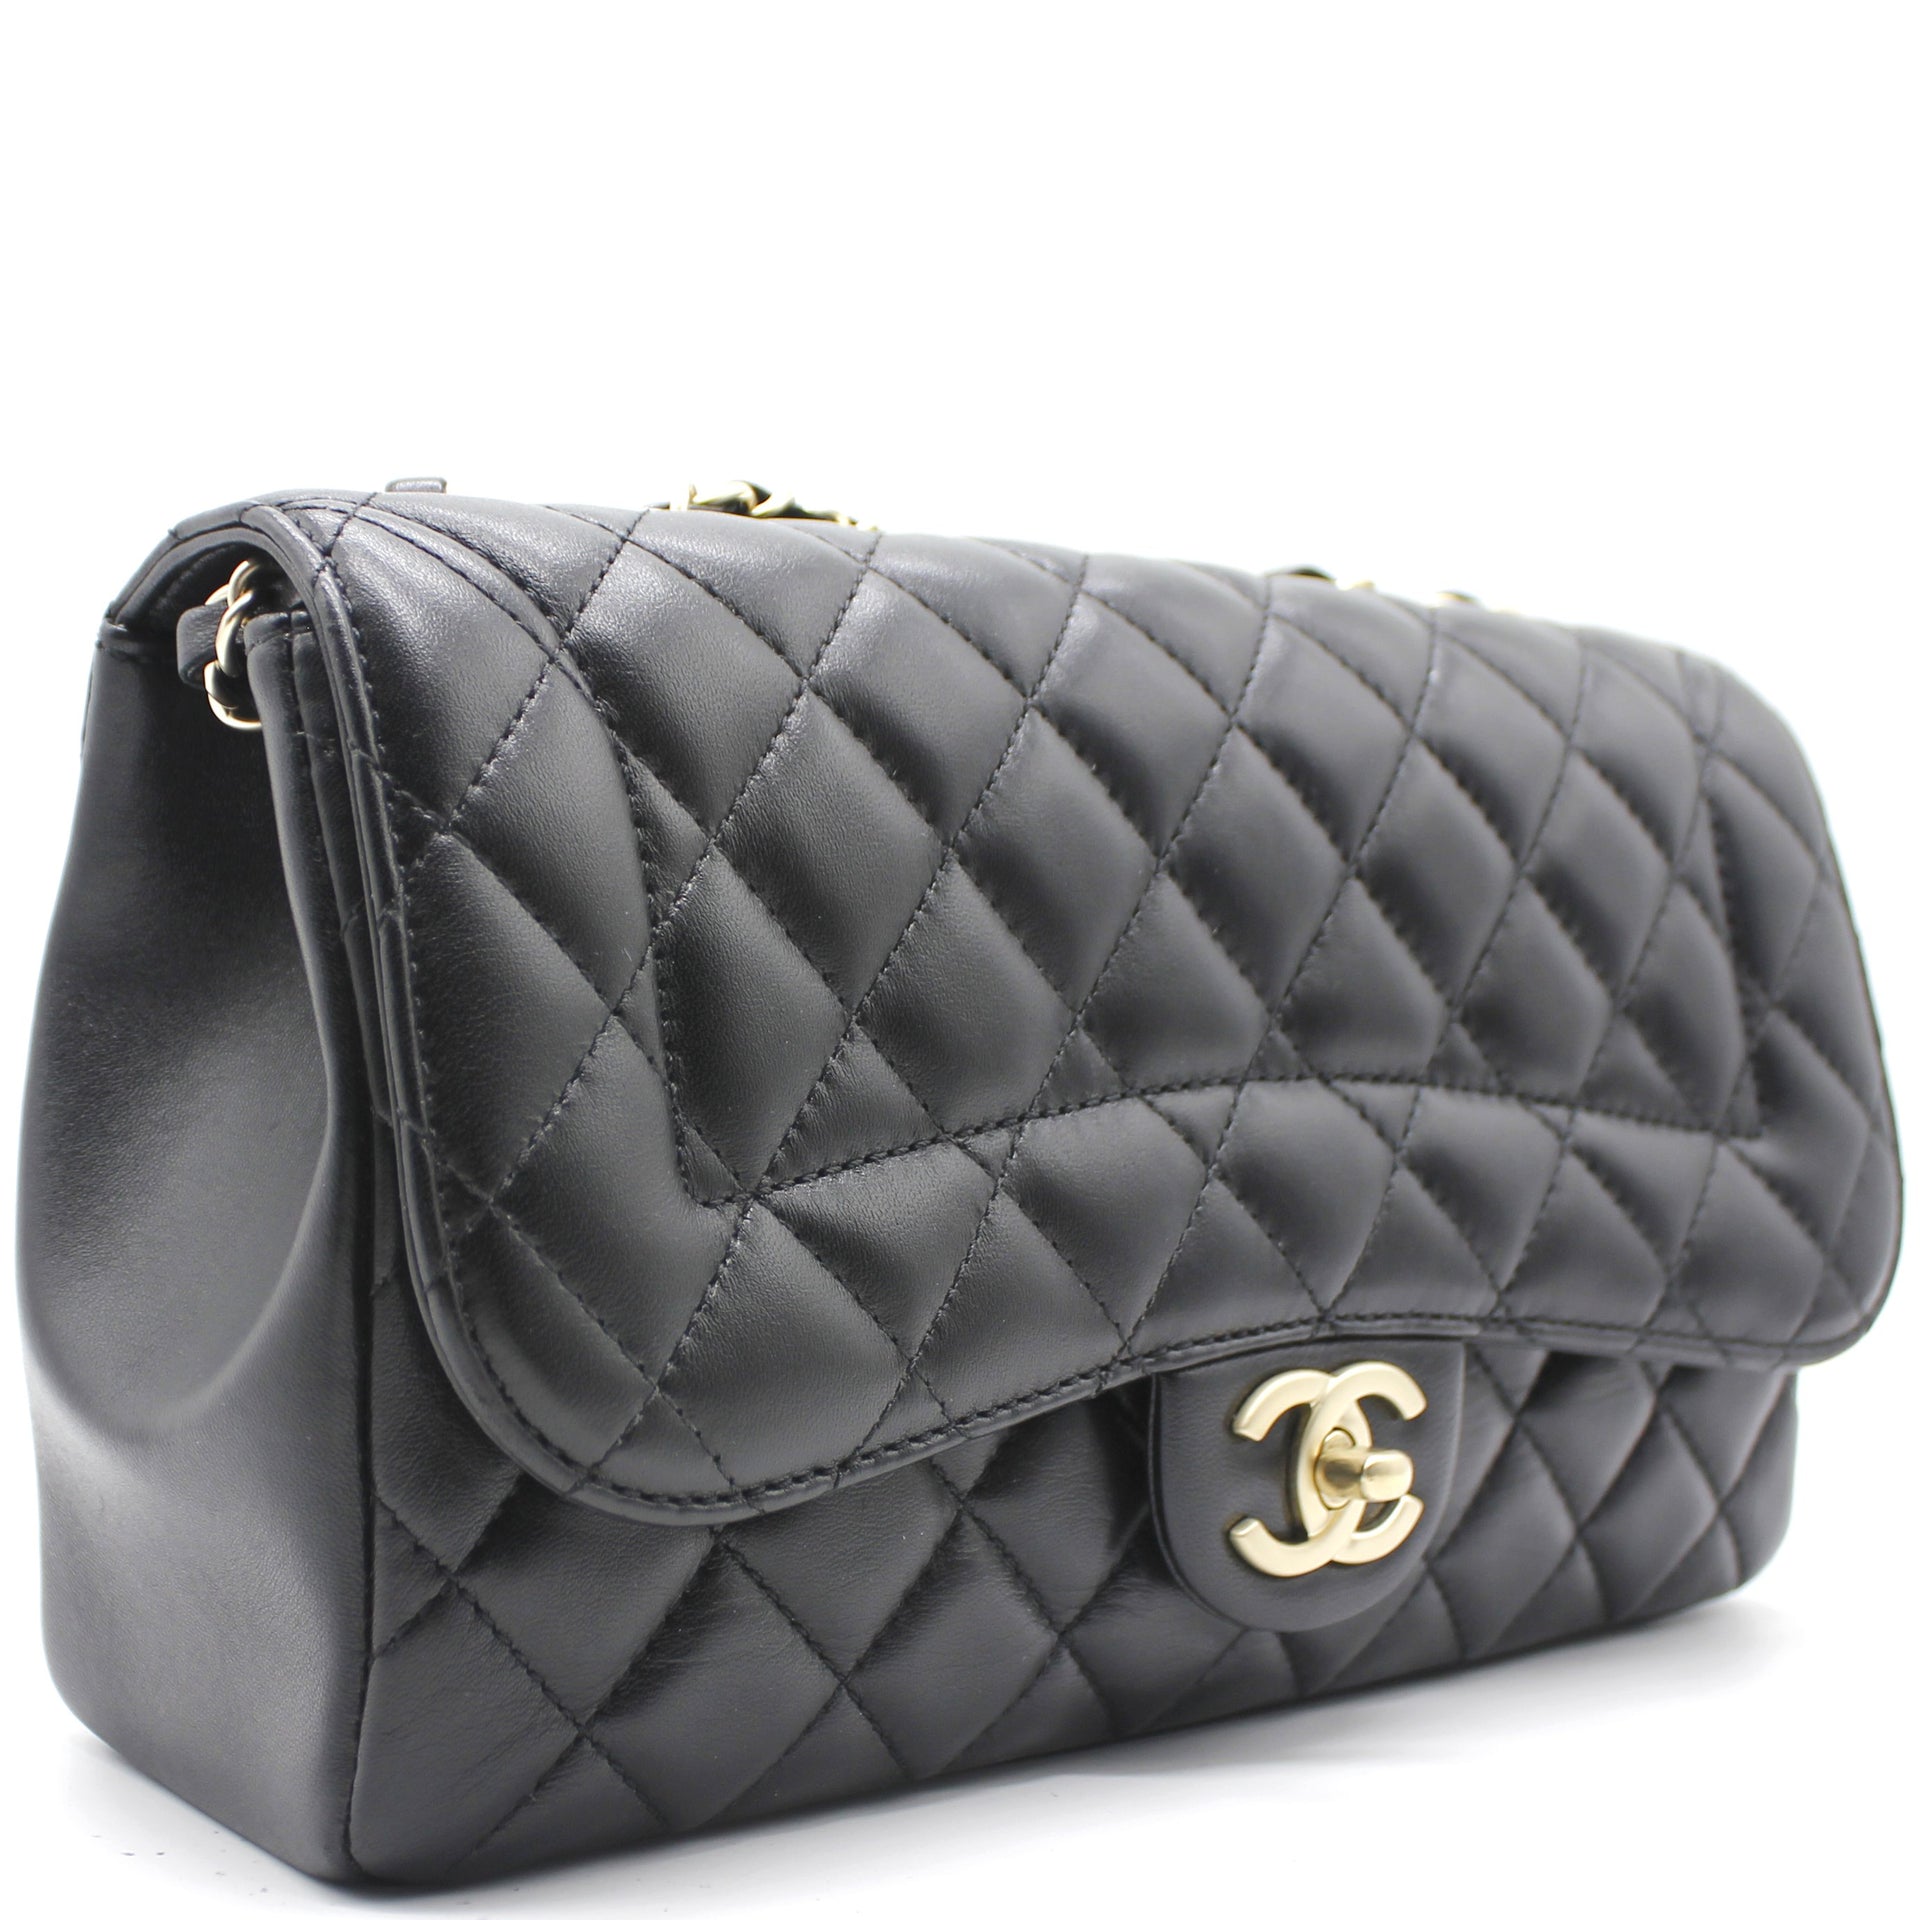 CHANEL Sequin Quilted Medium Chanel 19 Flap Light Green, FASHIONPHILE